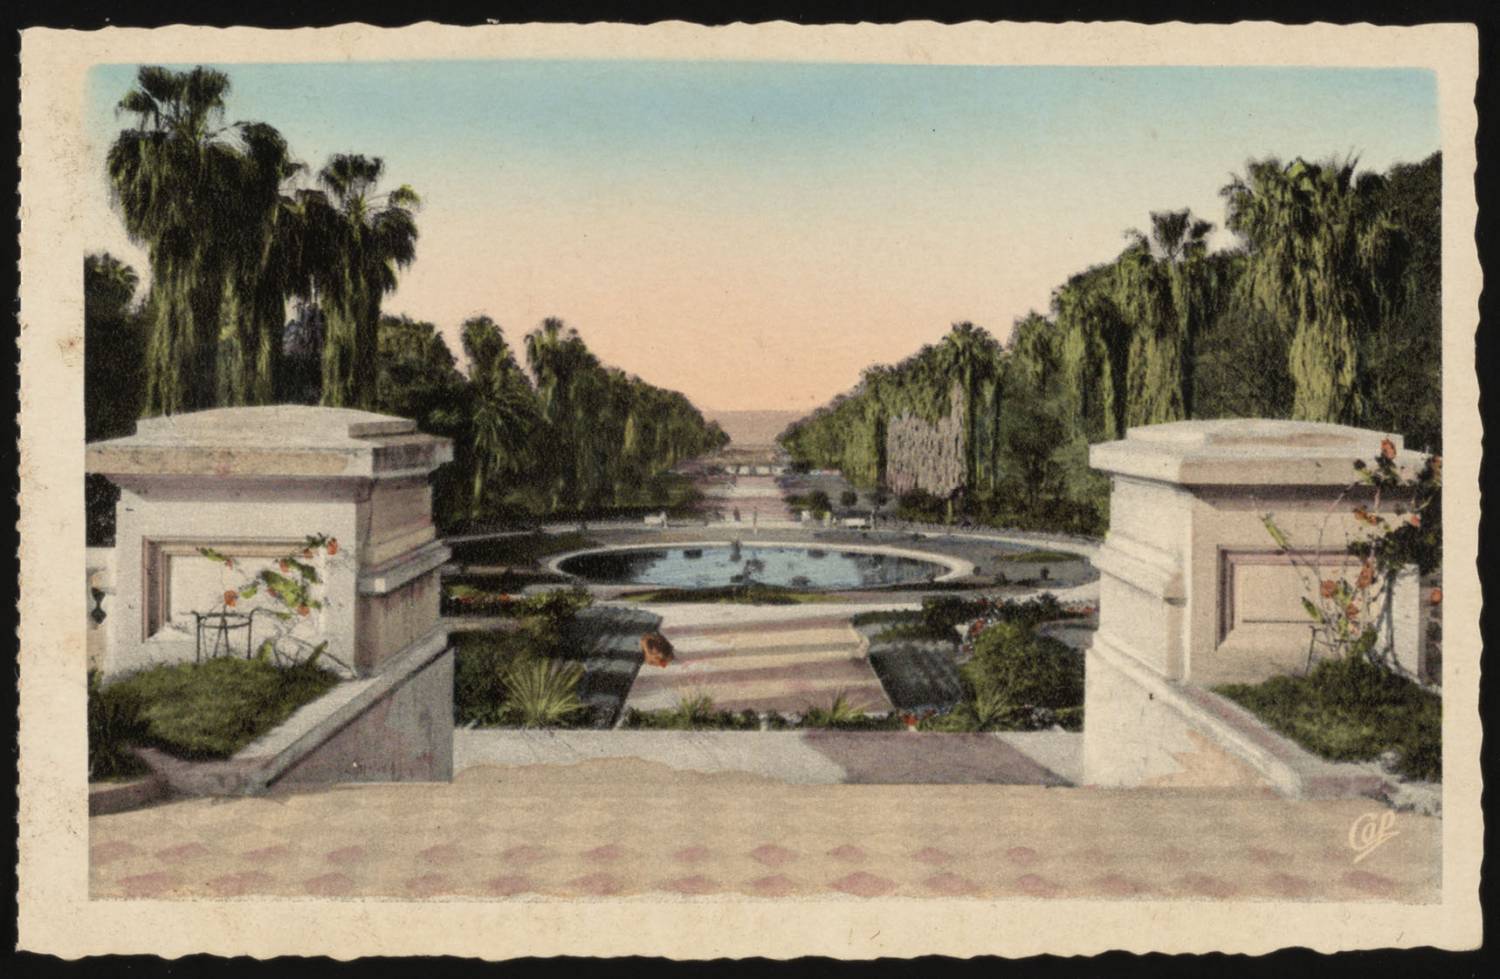 View of the botanical garden across the large fountain